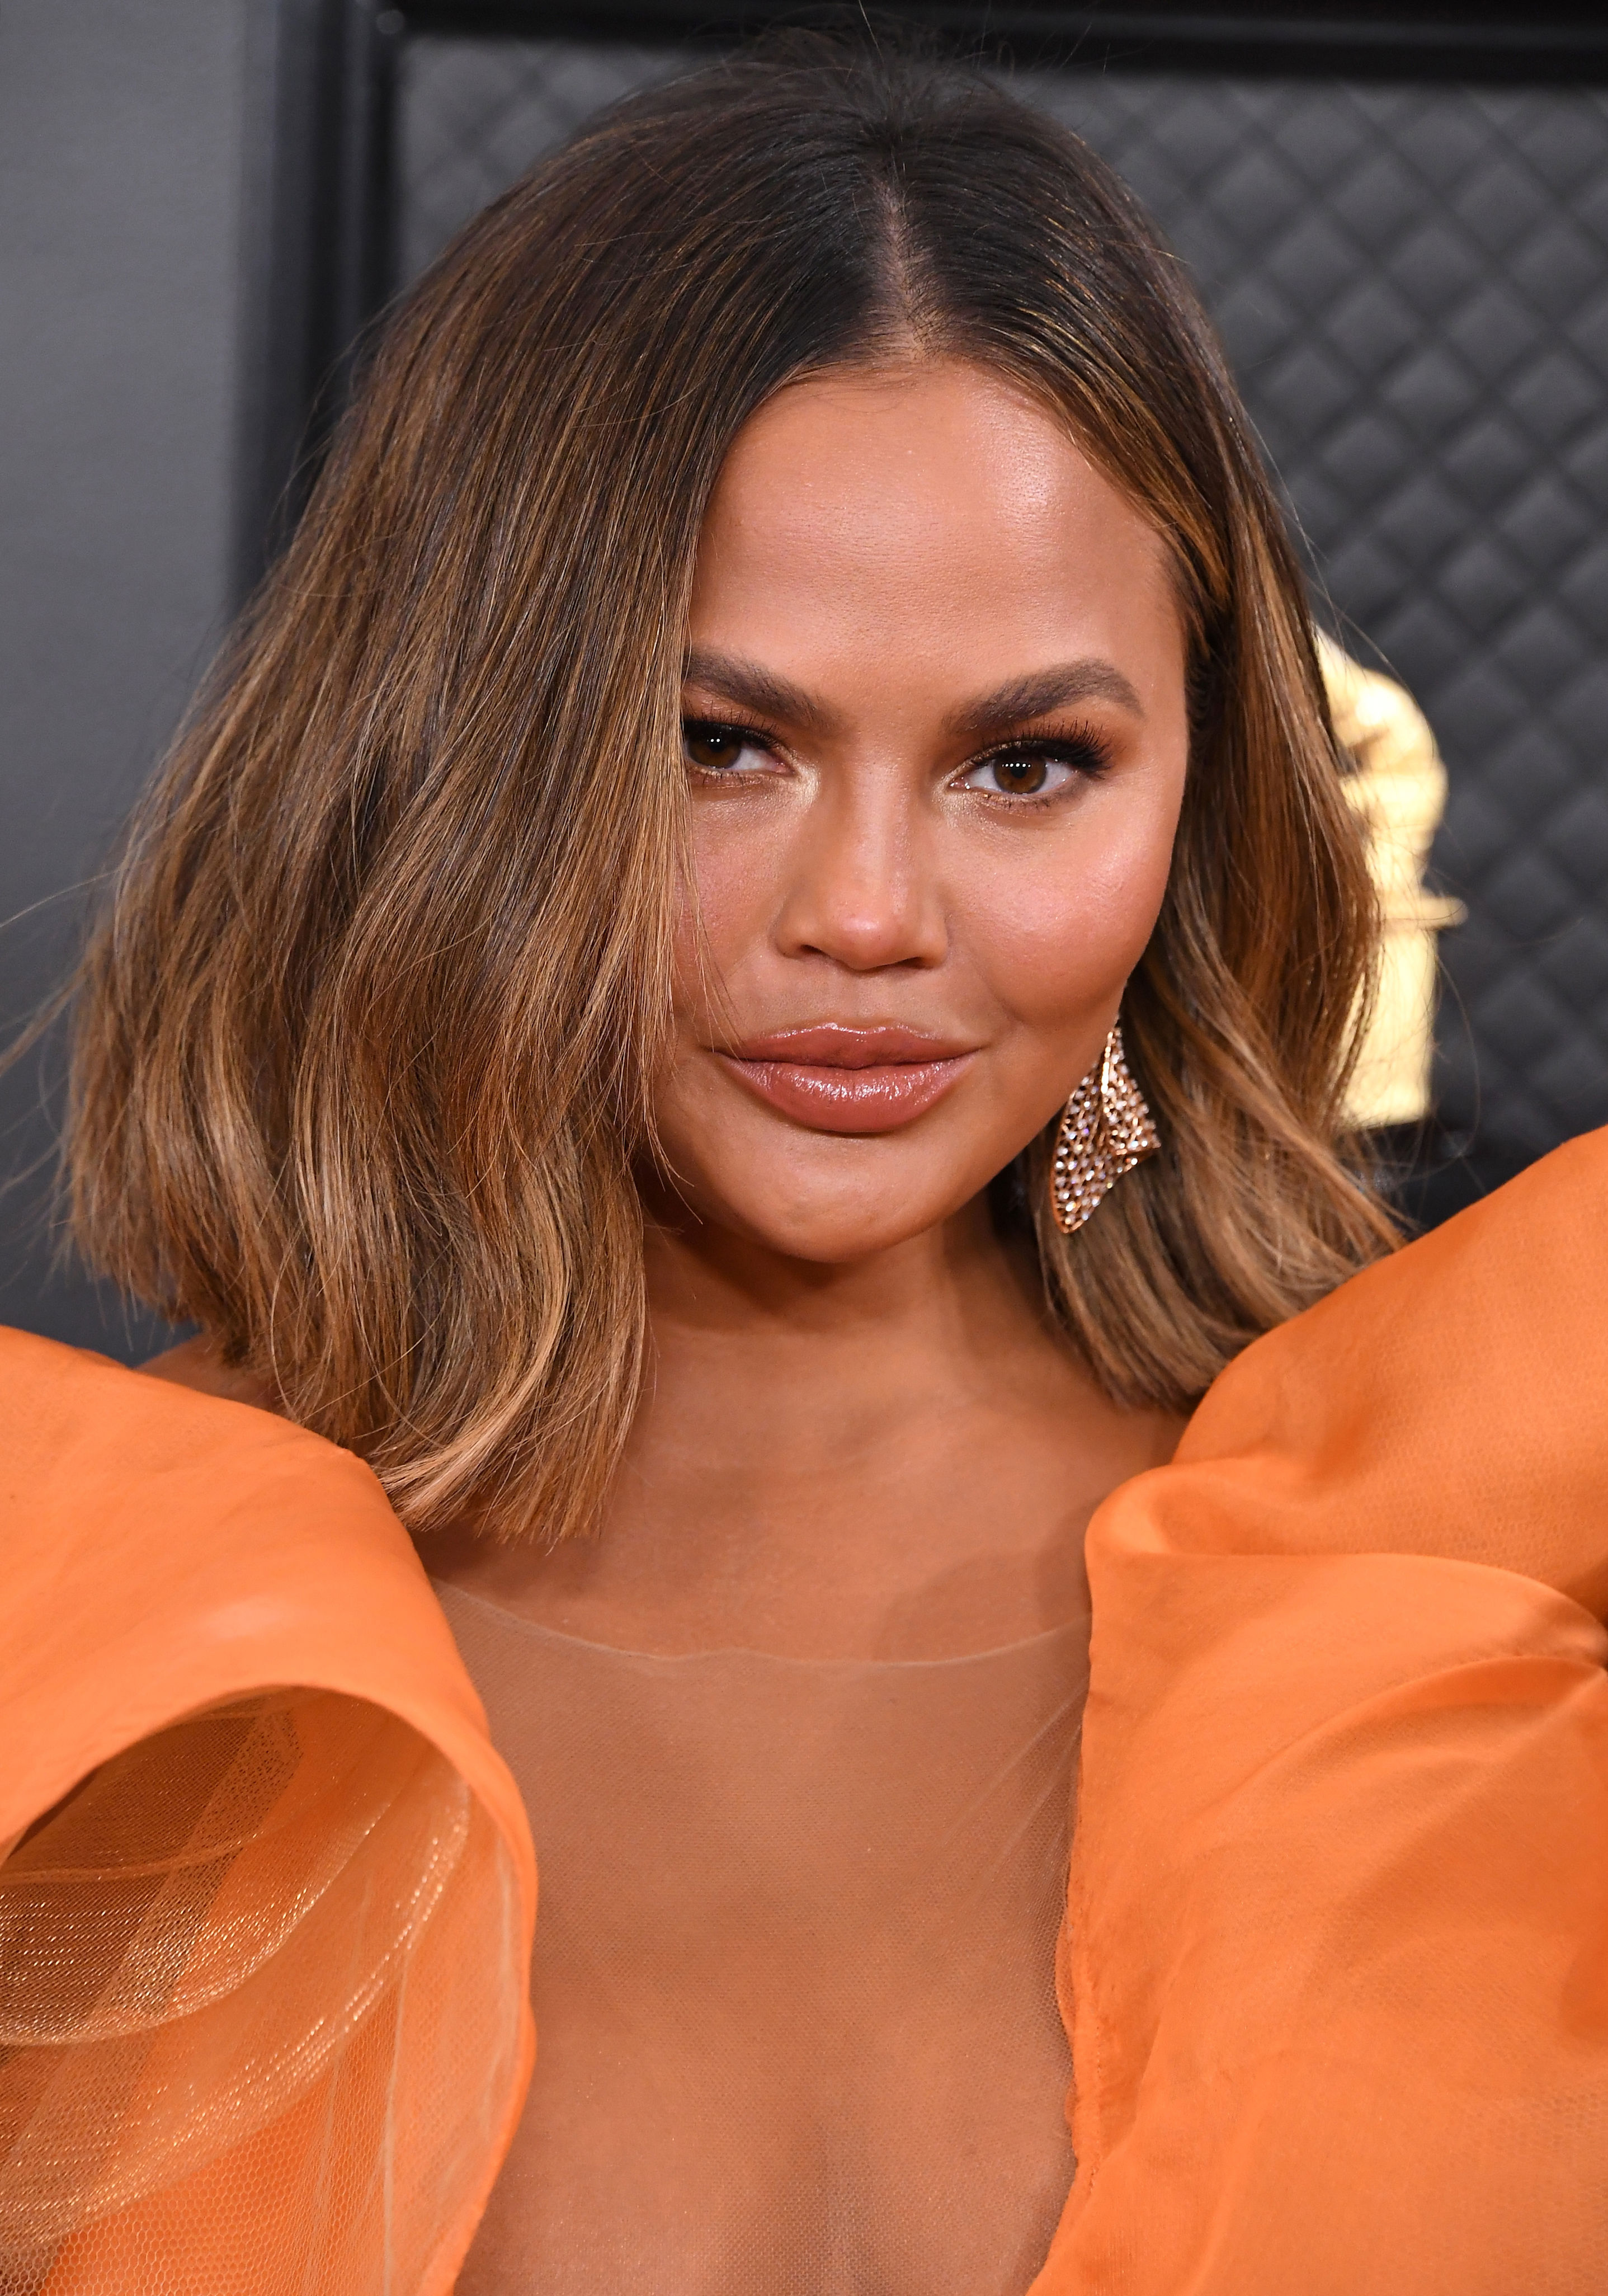 <p><a href="https://www.wonderwall.com/celebrity/profiles/overview/chrissy-teigen-1561.article">Chrissy Teigen</a> has long been open about visiting plastic surgeons to look her best. In September 2021, the model and cookbook author revealed <a href="https://www.wonderwall.com/news/chrissy-teigen-had-fat-removed-from-her-cheeks-in-cosmetic-procedure-496912.article">she had fat removed from her cheeks</a>. Keep reading to see the results...</p>